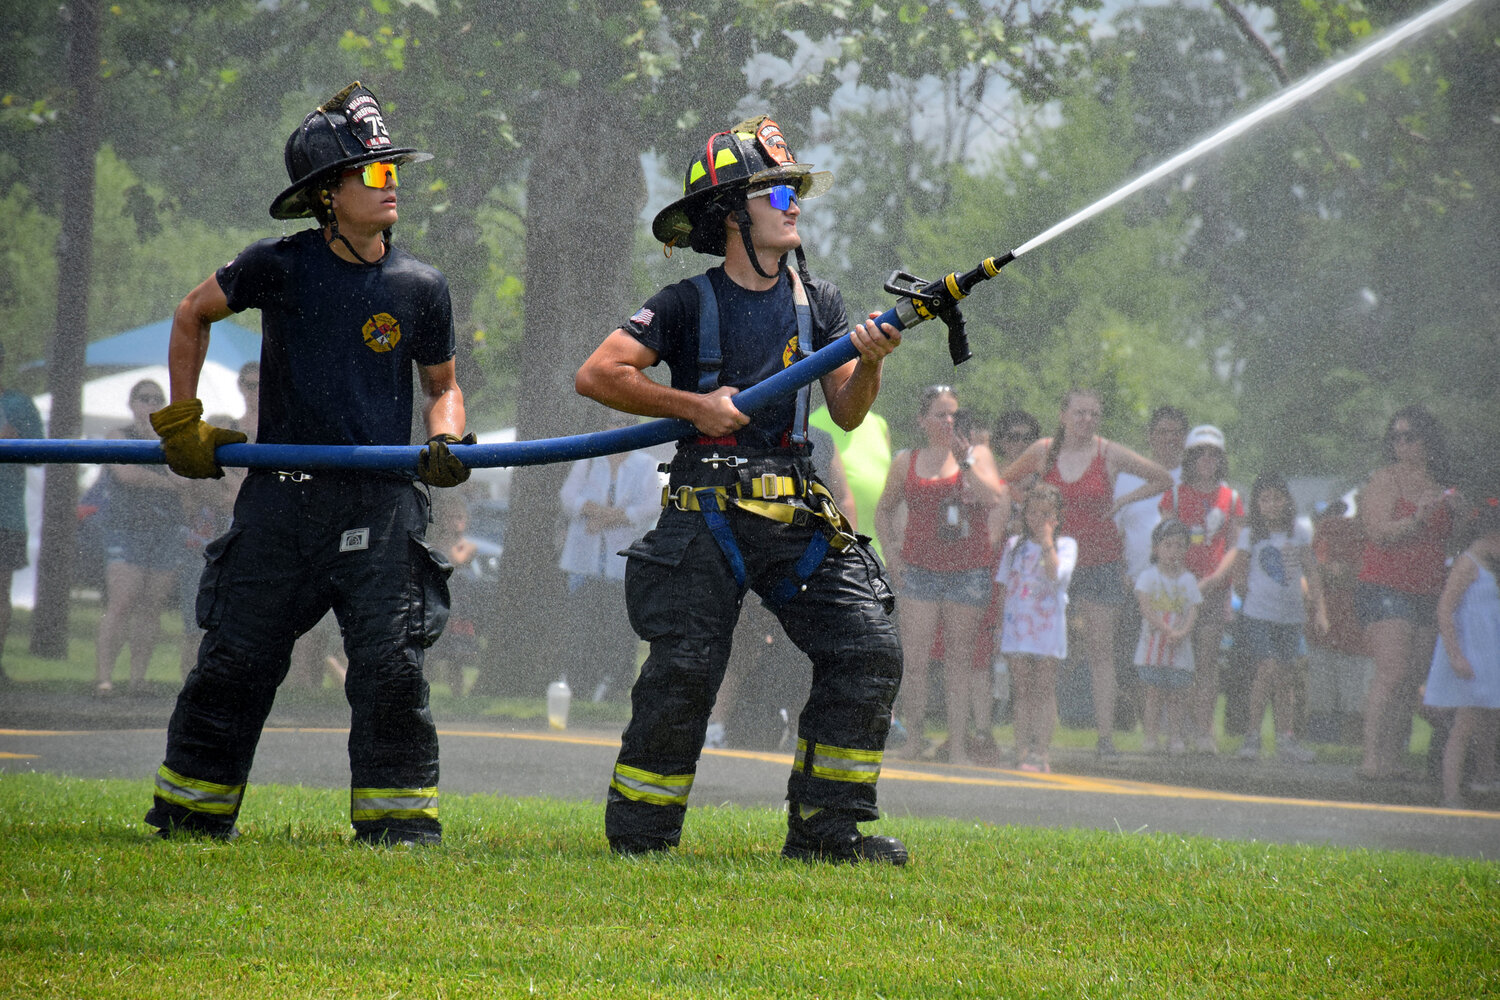 Milford Junior Firefighters took part in the water battles Tuesday at Memorial Park in Quakertown as part of the borough’s community day.